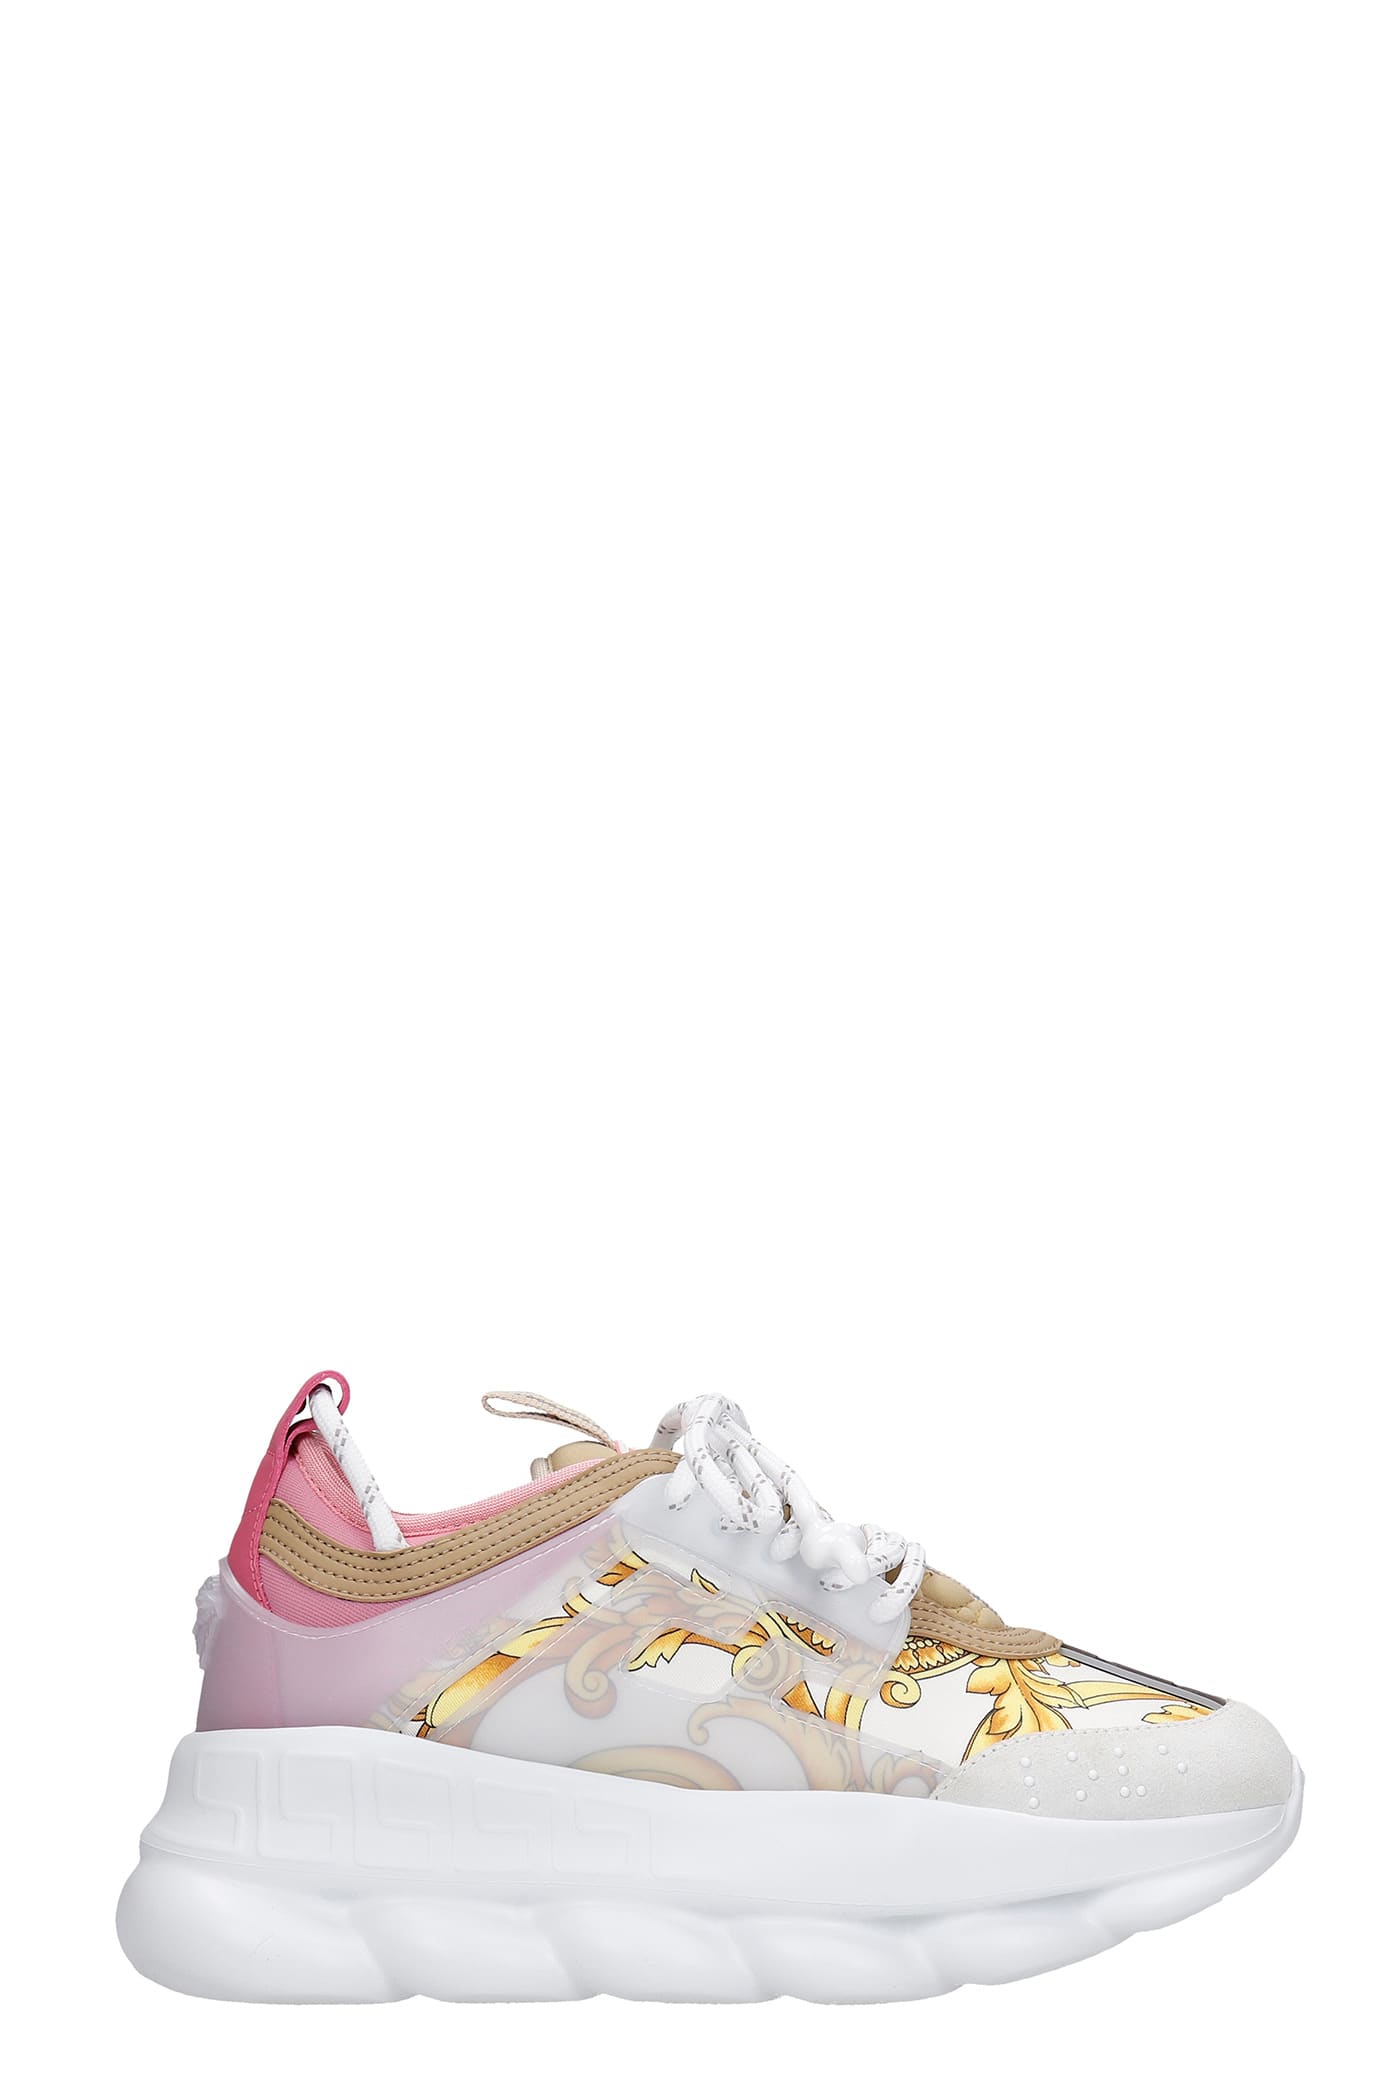 Versace Chain React Sneakers In White Synthetic Fibers